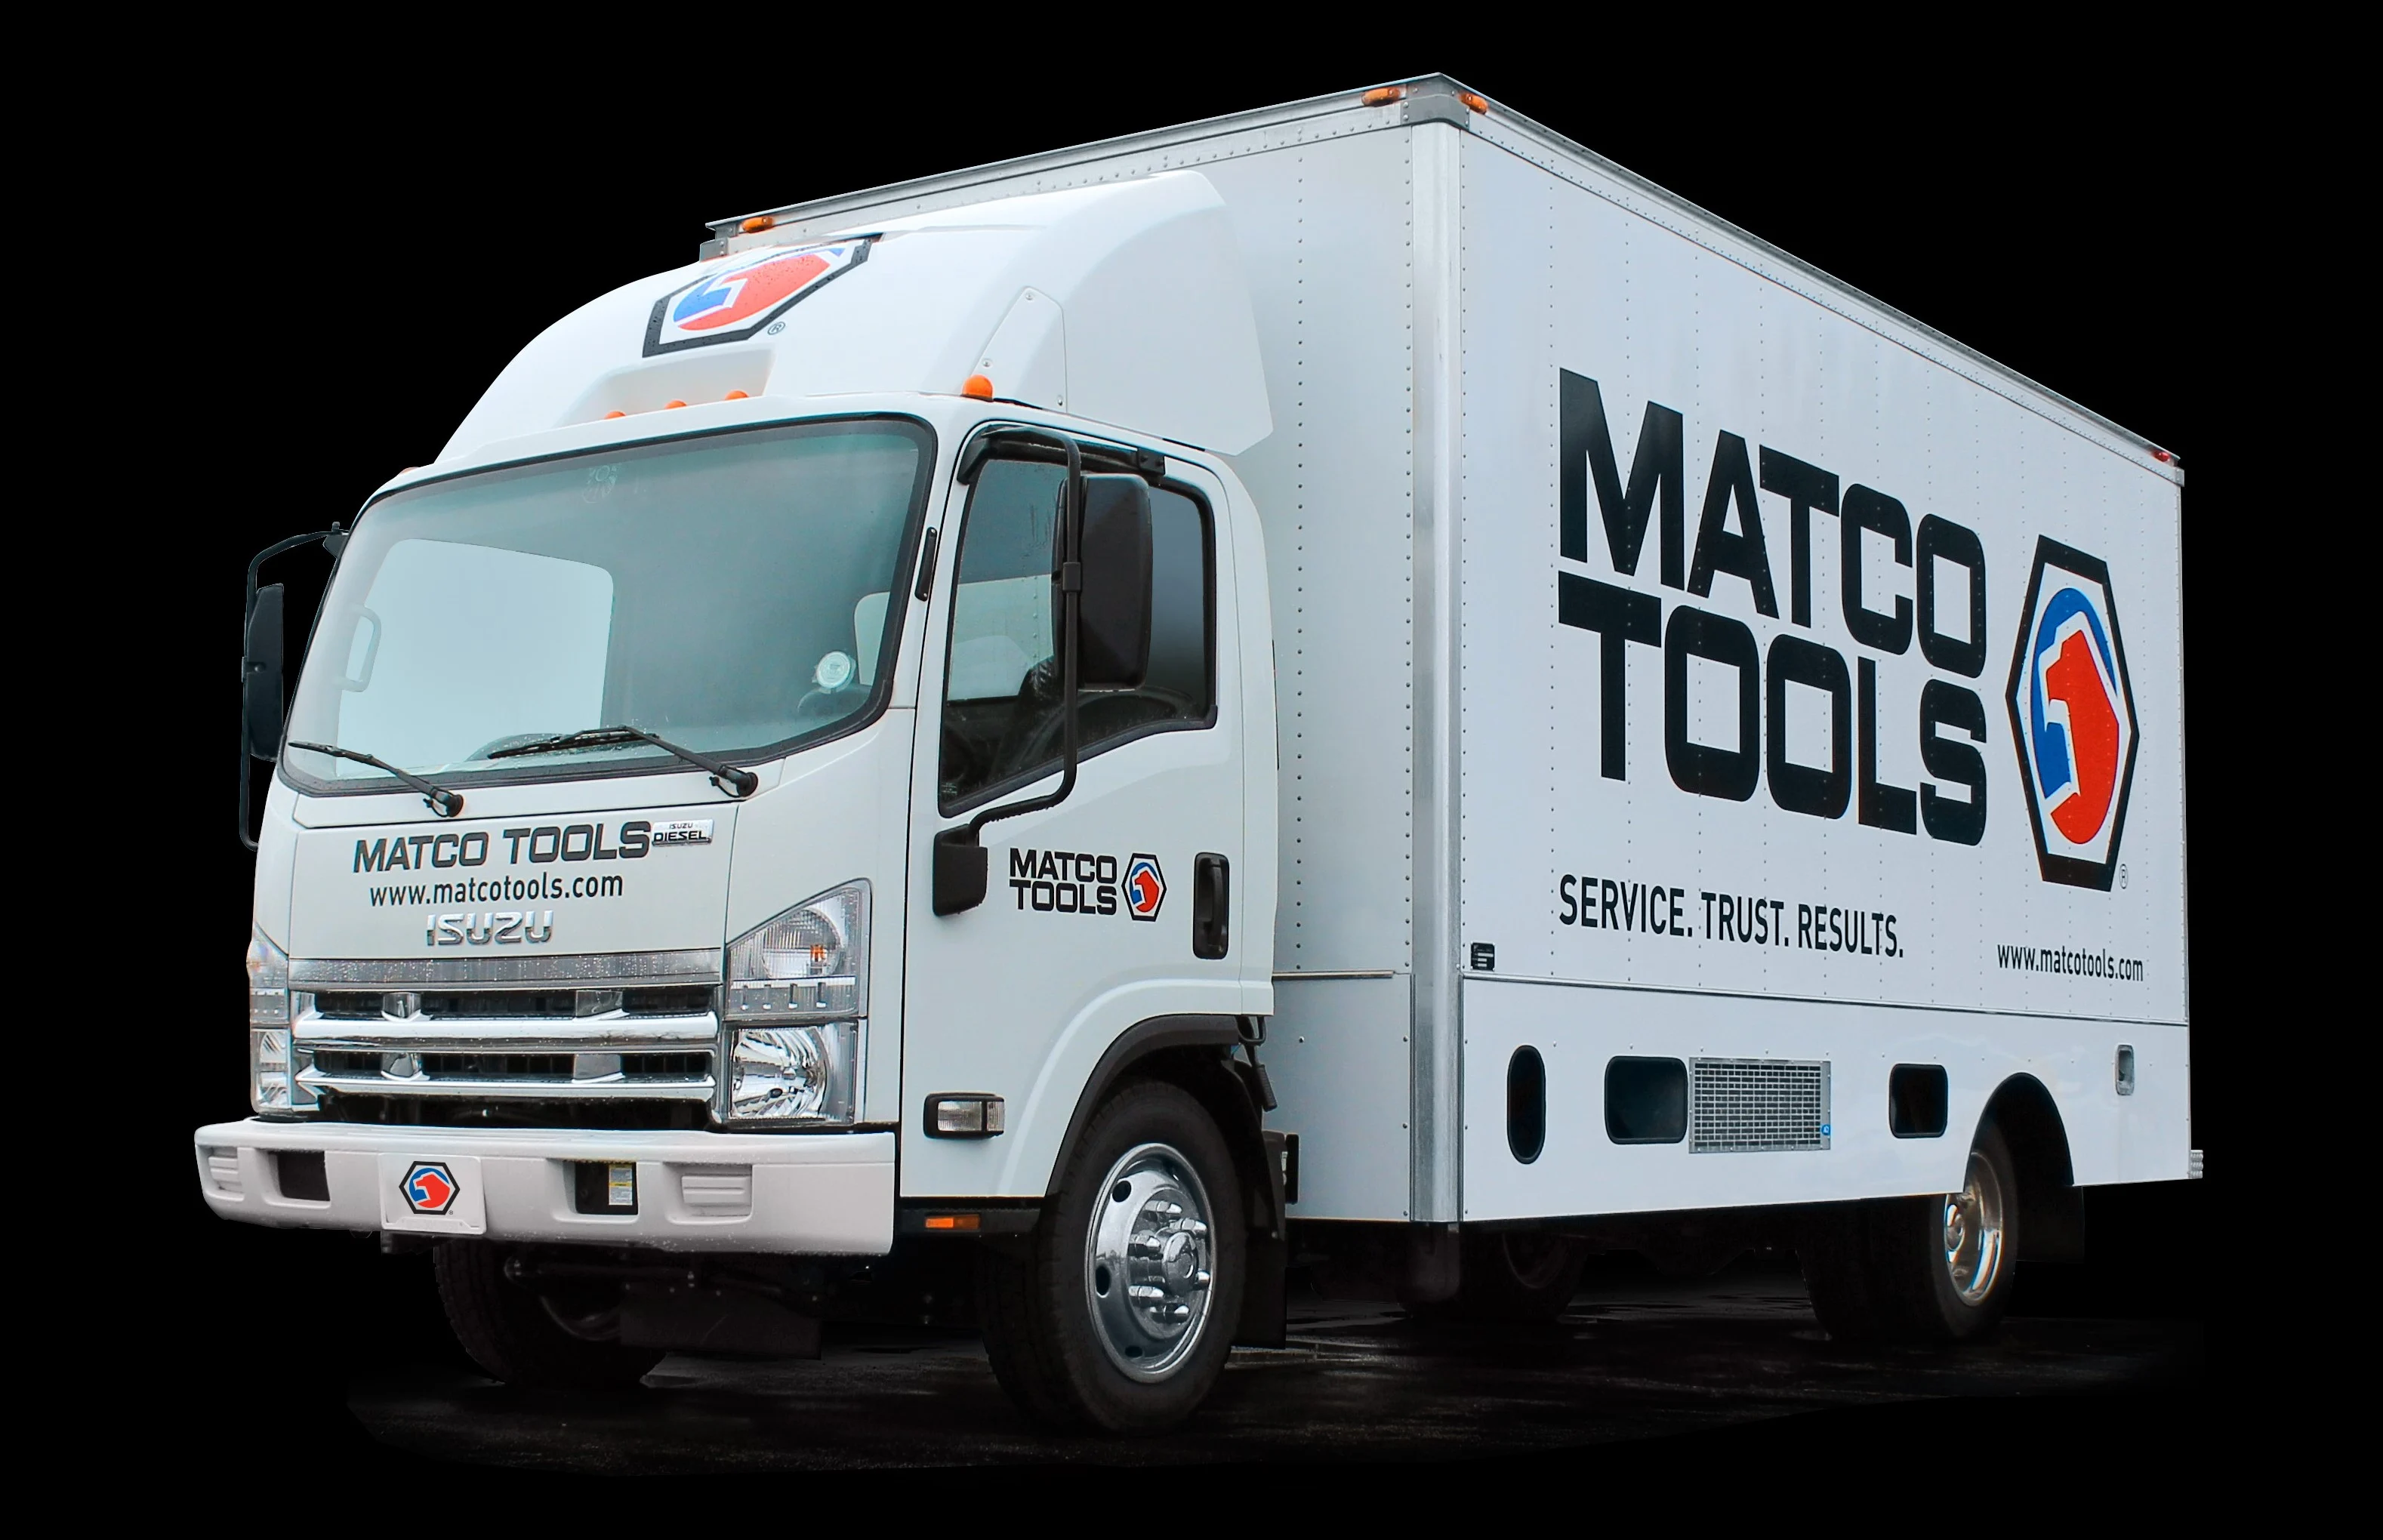 Start a Home-Based Franchise with a Matco 225 Tool Truck